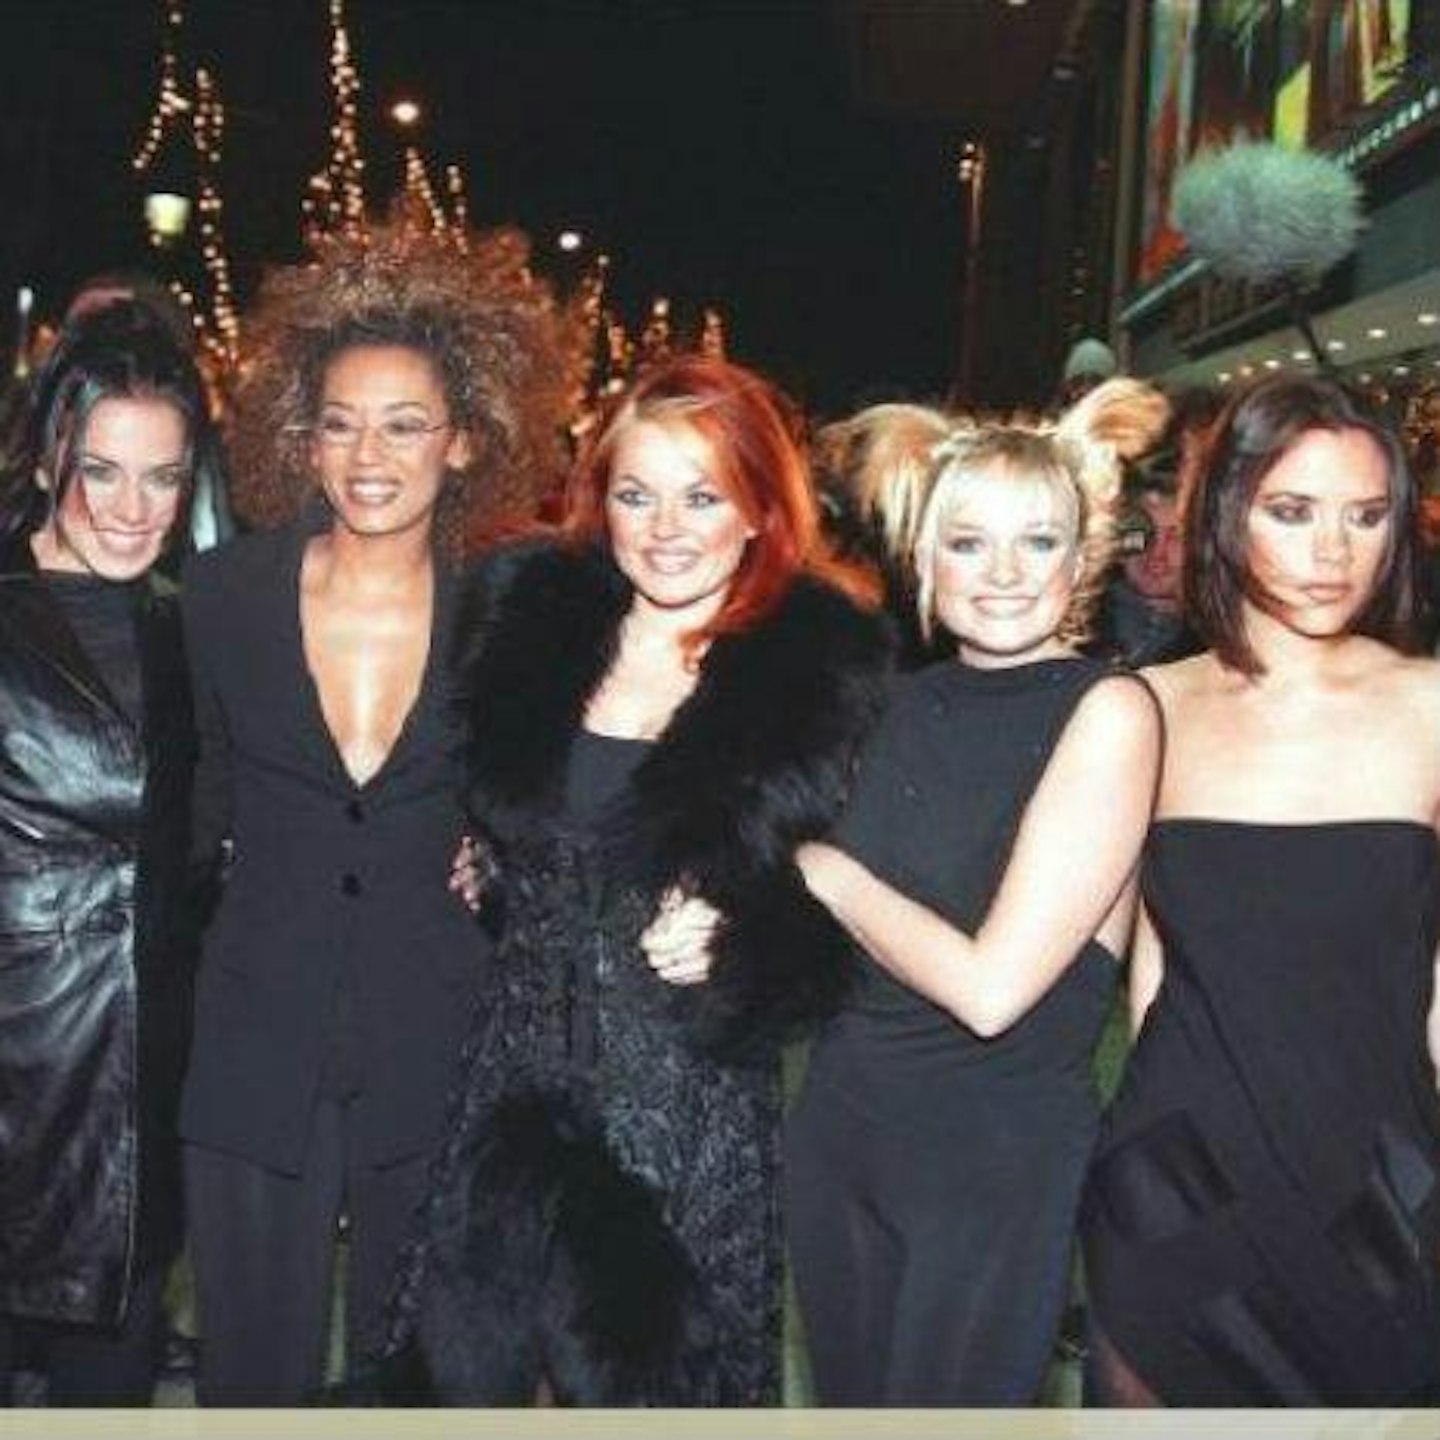 The Spice Girls at the Spice World premiere in 1997